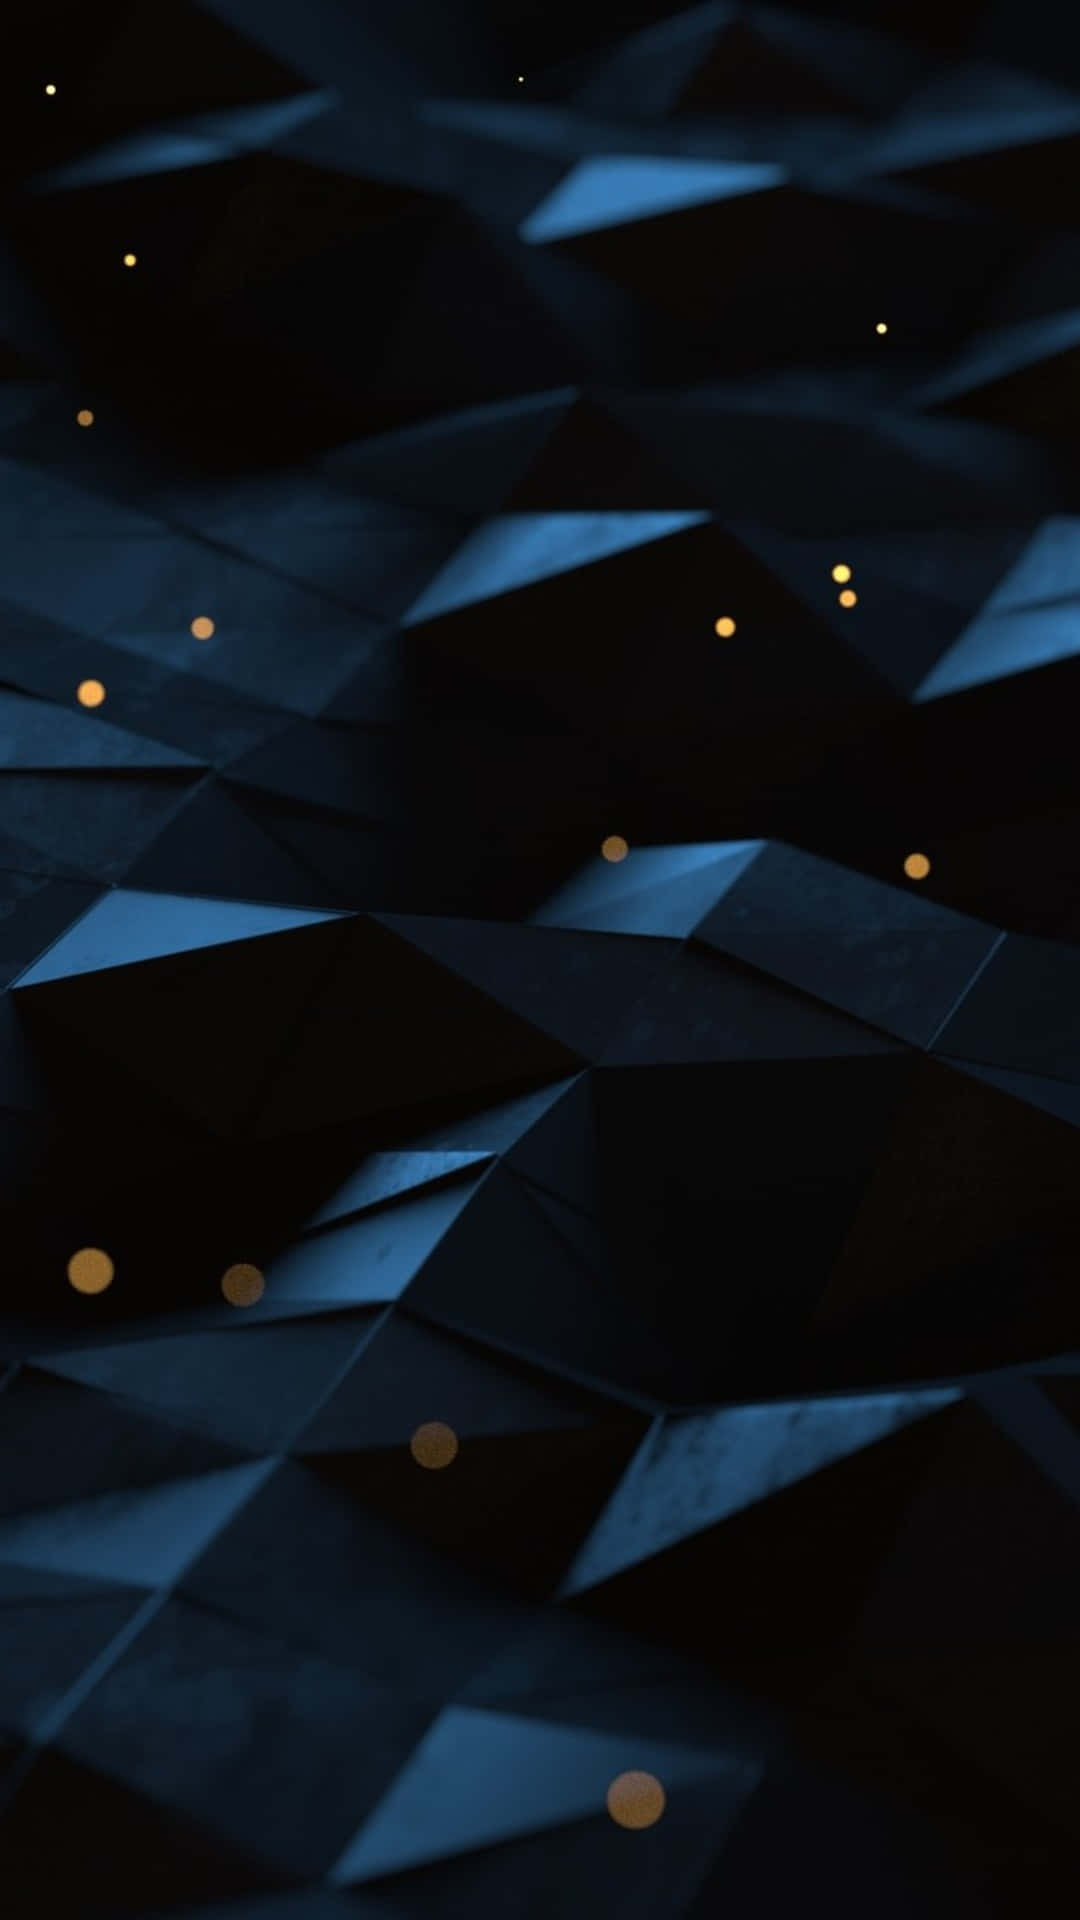 An artistic wallpaper of geometric shapes for the iPhone Wallpaper